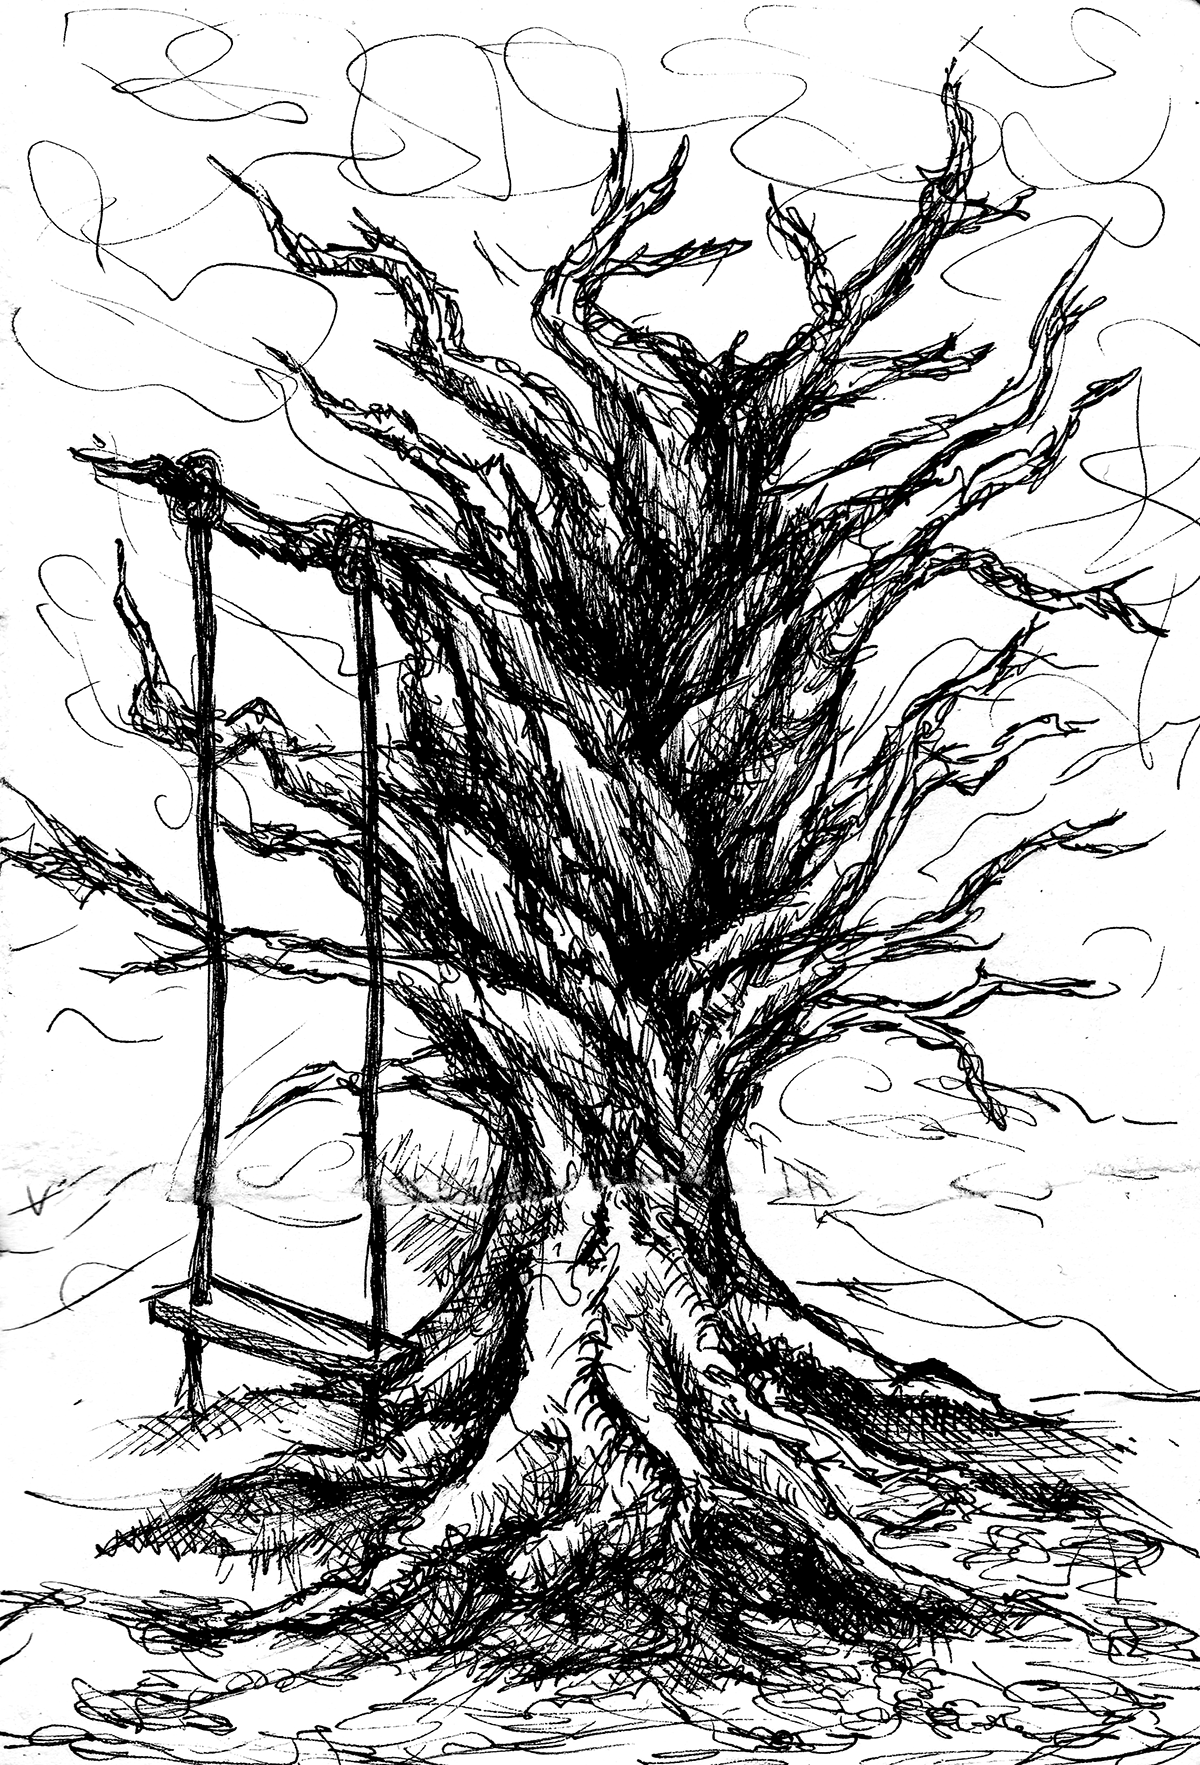 Tree  trees summertime Pencil drawing ink drawing Ink artwork ILLUSTRATION  Drawing  rope swing wintertime